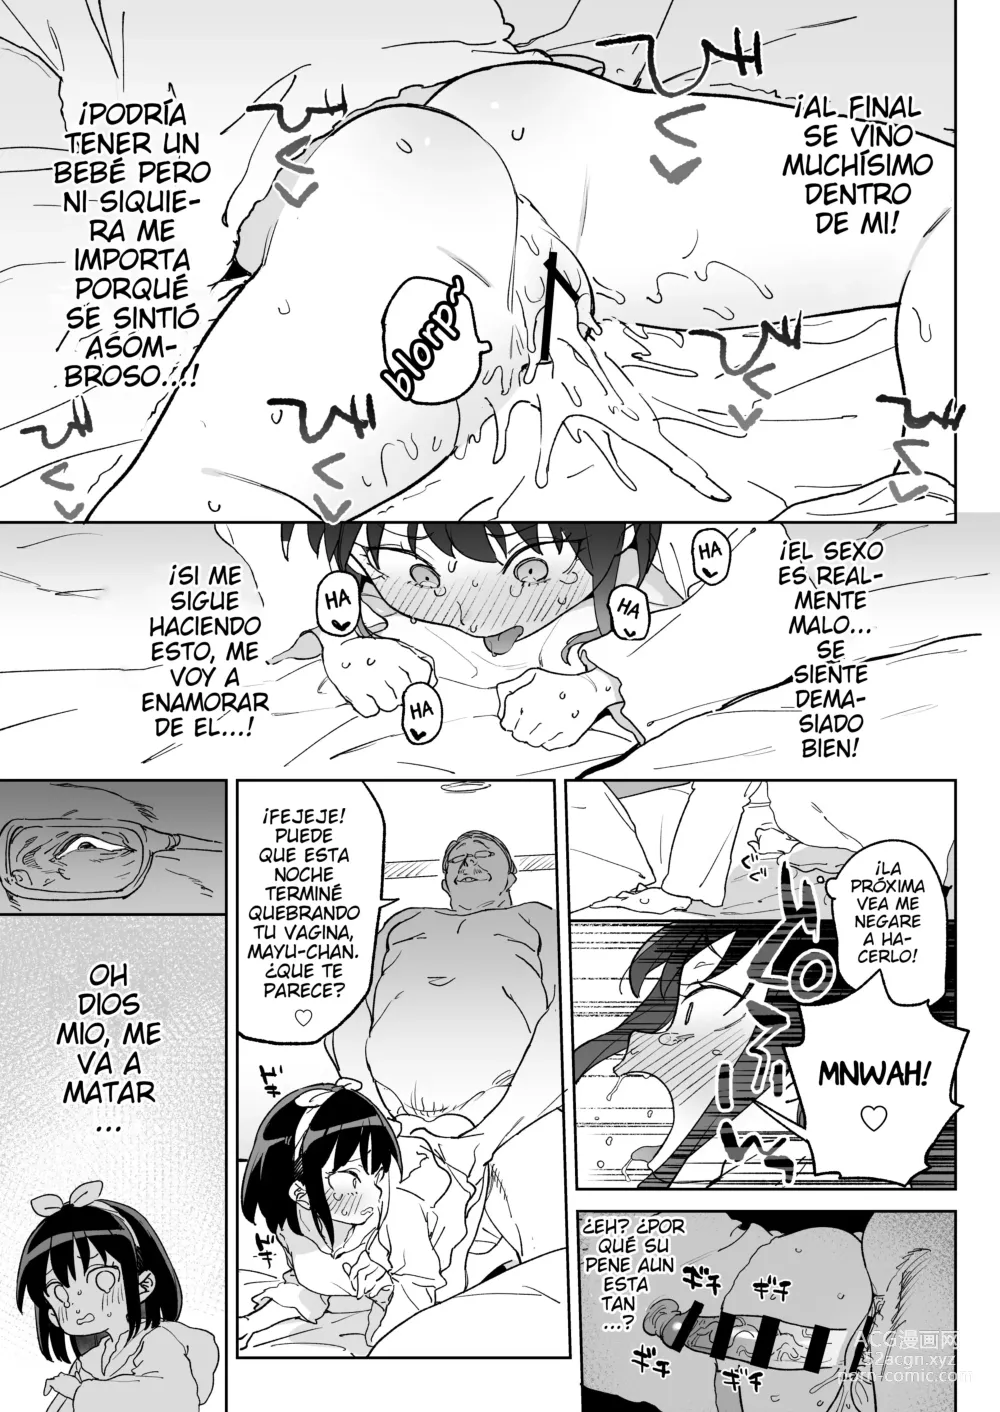 Page 18 of doujinshi November 28th: As of today, I belong to my new daddy!